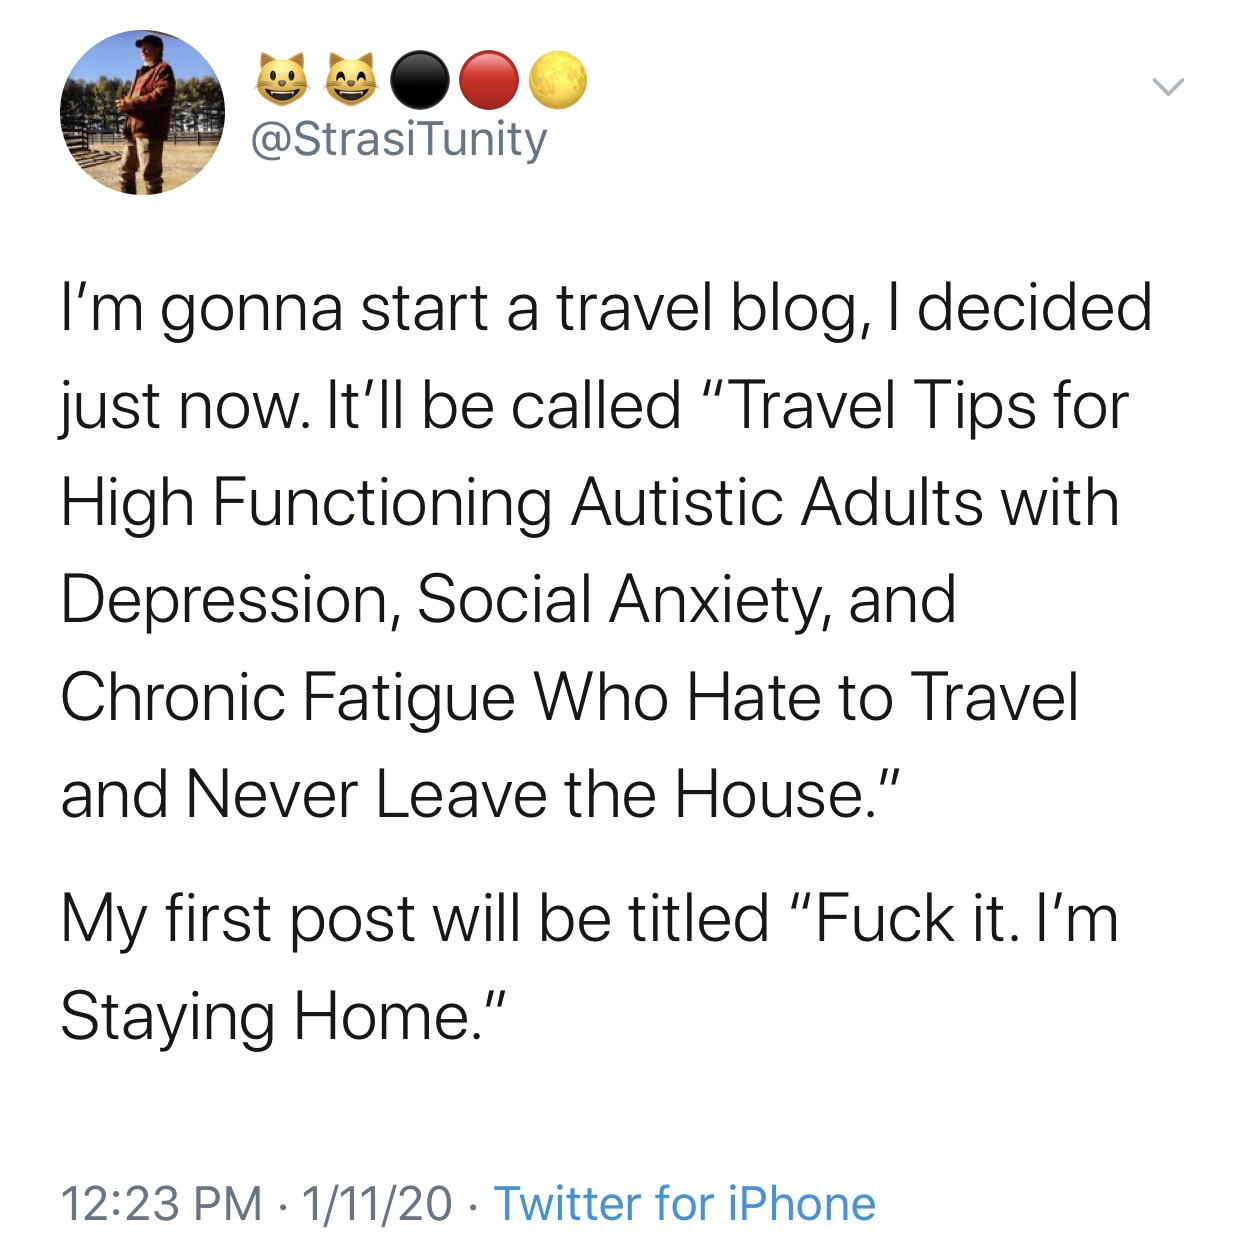 I'm gonna start a travel blog, I decided just now. It'll be called "Travel Tips for High Functioning Autistic Adults with Depression, Social Anxiety, and Chronic Fatigue Who Hate to Travel and Never Leave the House." My first post will be titled "Fuck it.